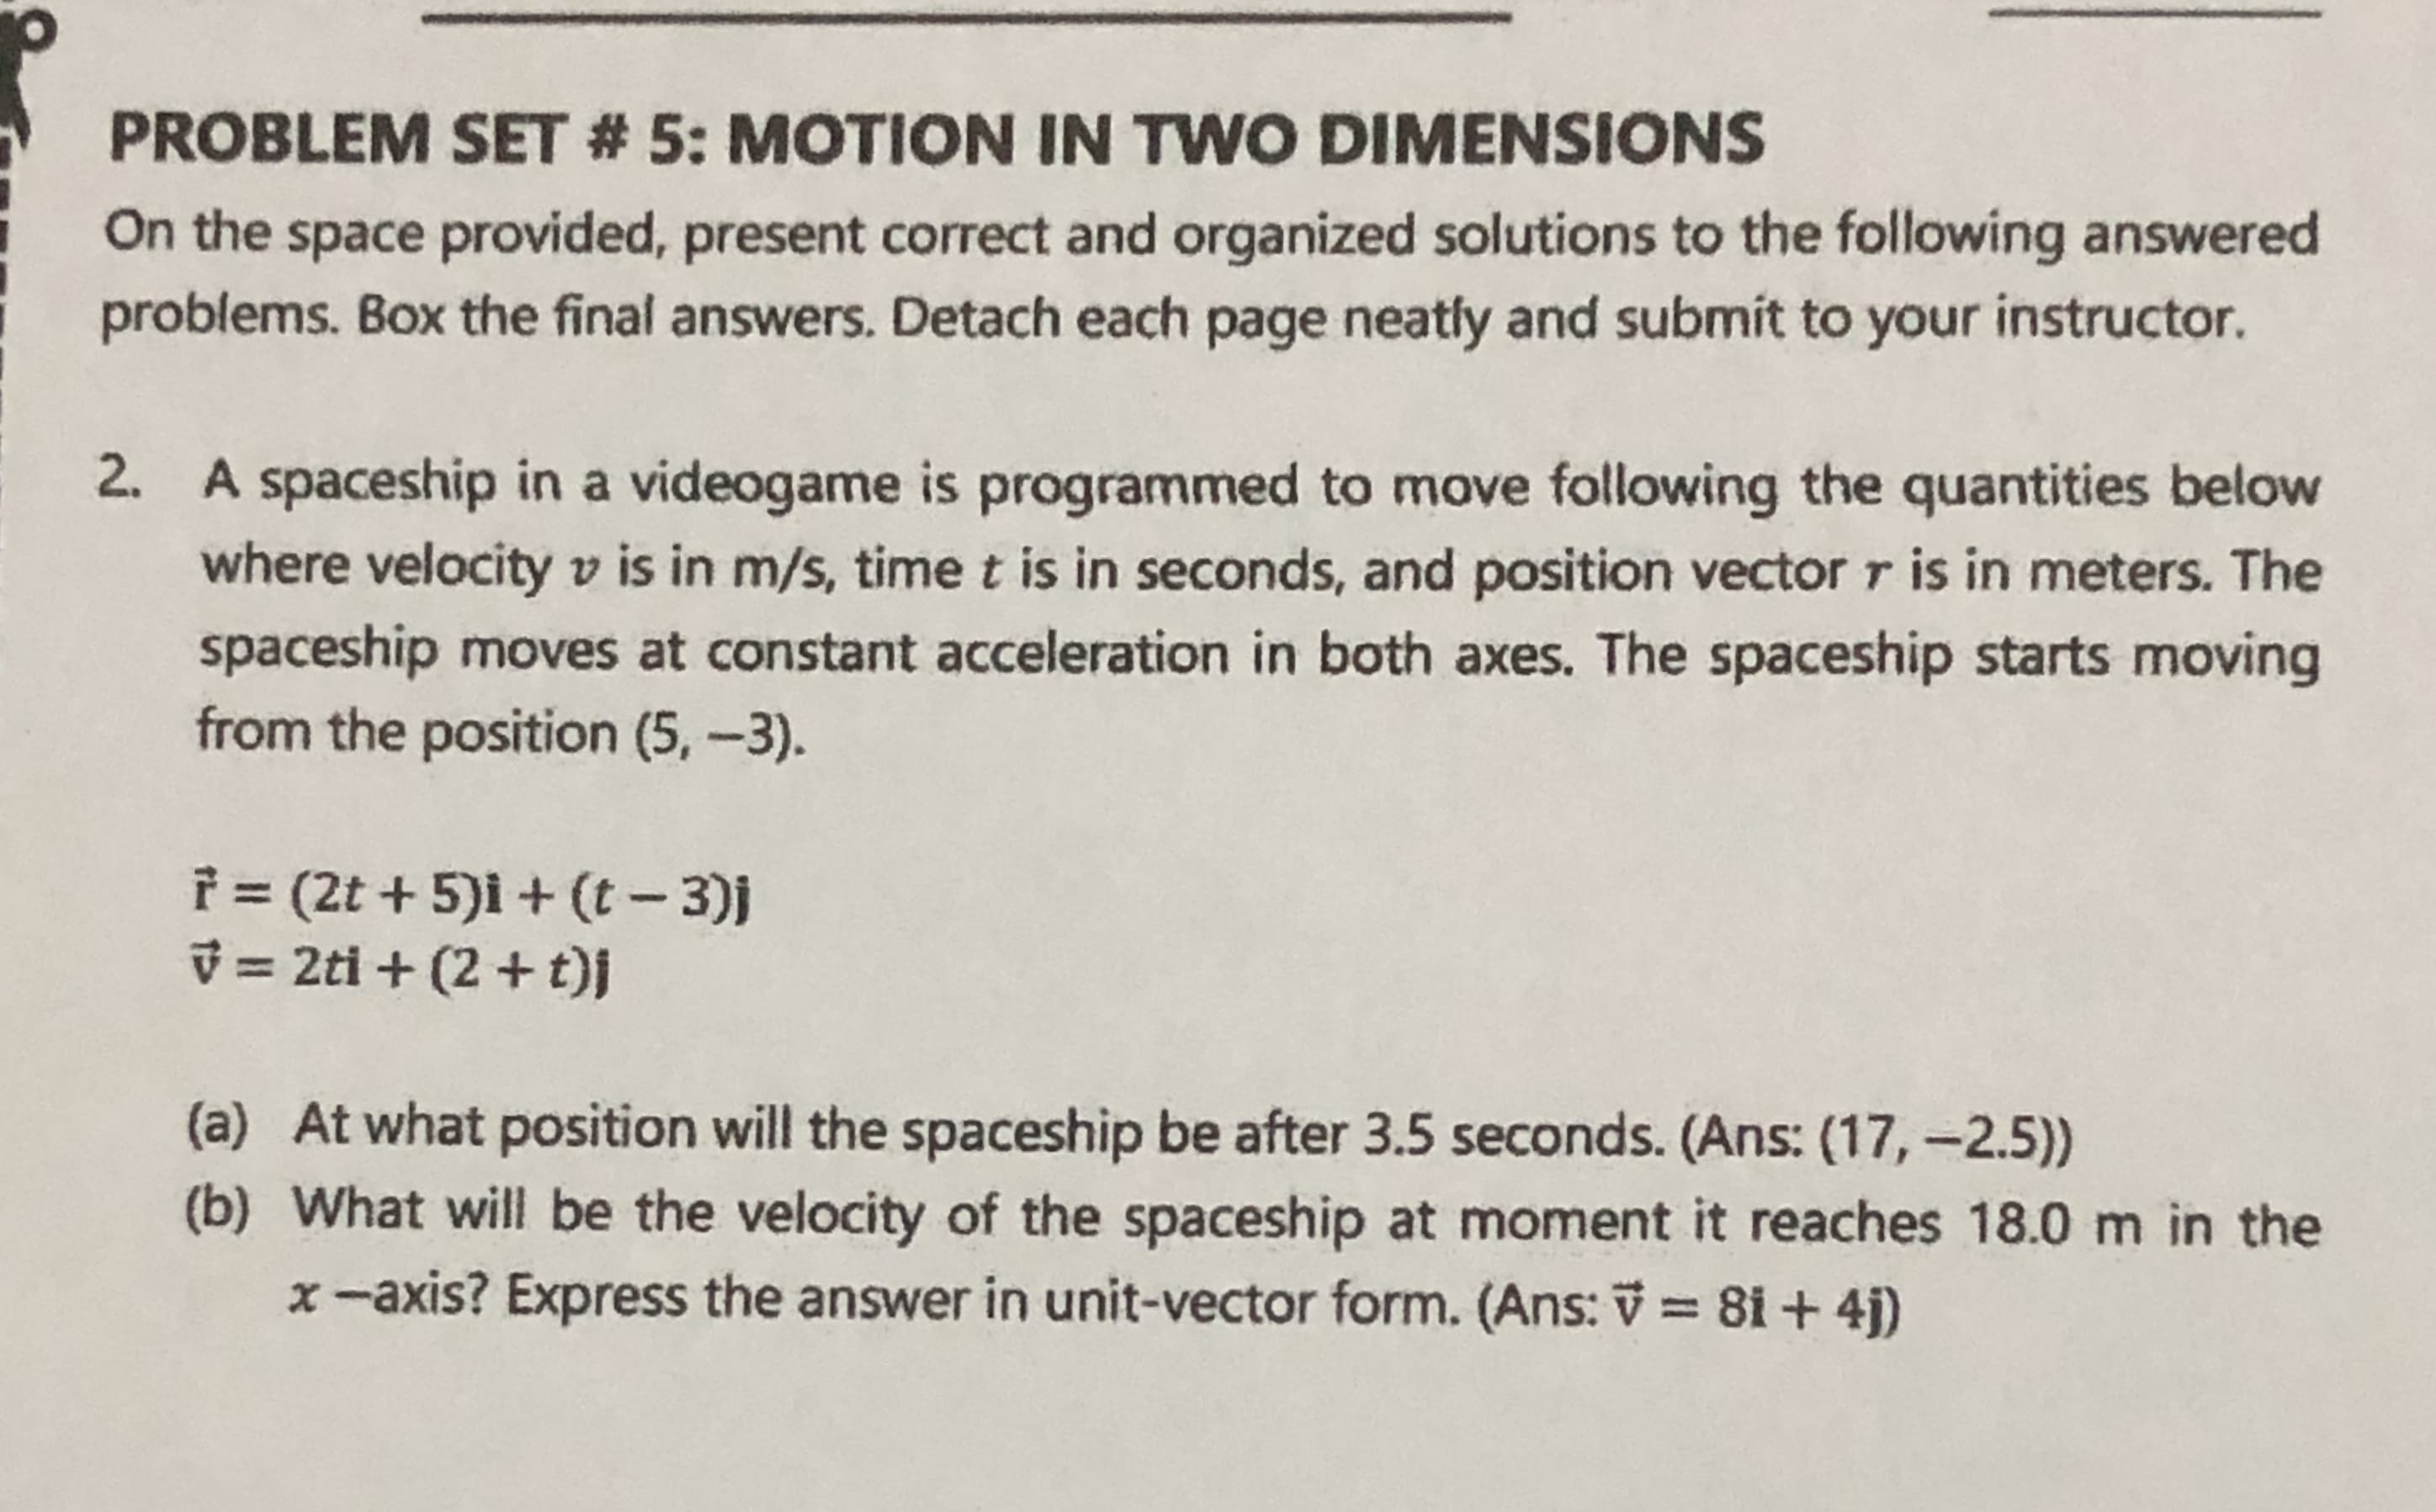 2. A spaceship in a videogame is programmed to move following the quantities below
where velocity v is in m/s, time t is in seconds, and position vector r is in meters. The
spaceship moves at constant acceleration in both axes. The spaceship starts moving
from the position (5,-3).
f (2t + 5)i + (t- 3)j
V = 2ti + (2 + t)j
(a) At what position will the spaceship be after 3.5 seconds. (Ans: (17, -2.5))
(b) What will be the velocity of the spaceship at moment it reaches 18.0 m in the
x-axis? Express the answer in unit-vector form. (Ans: V = 81 + 4j)
%3D
